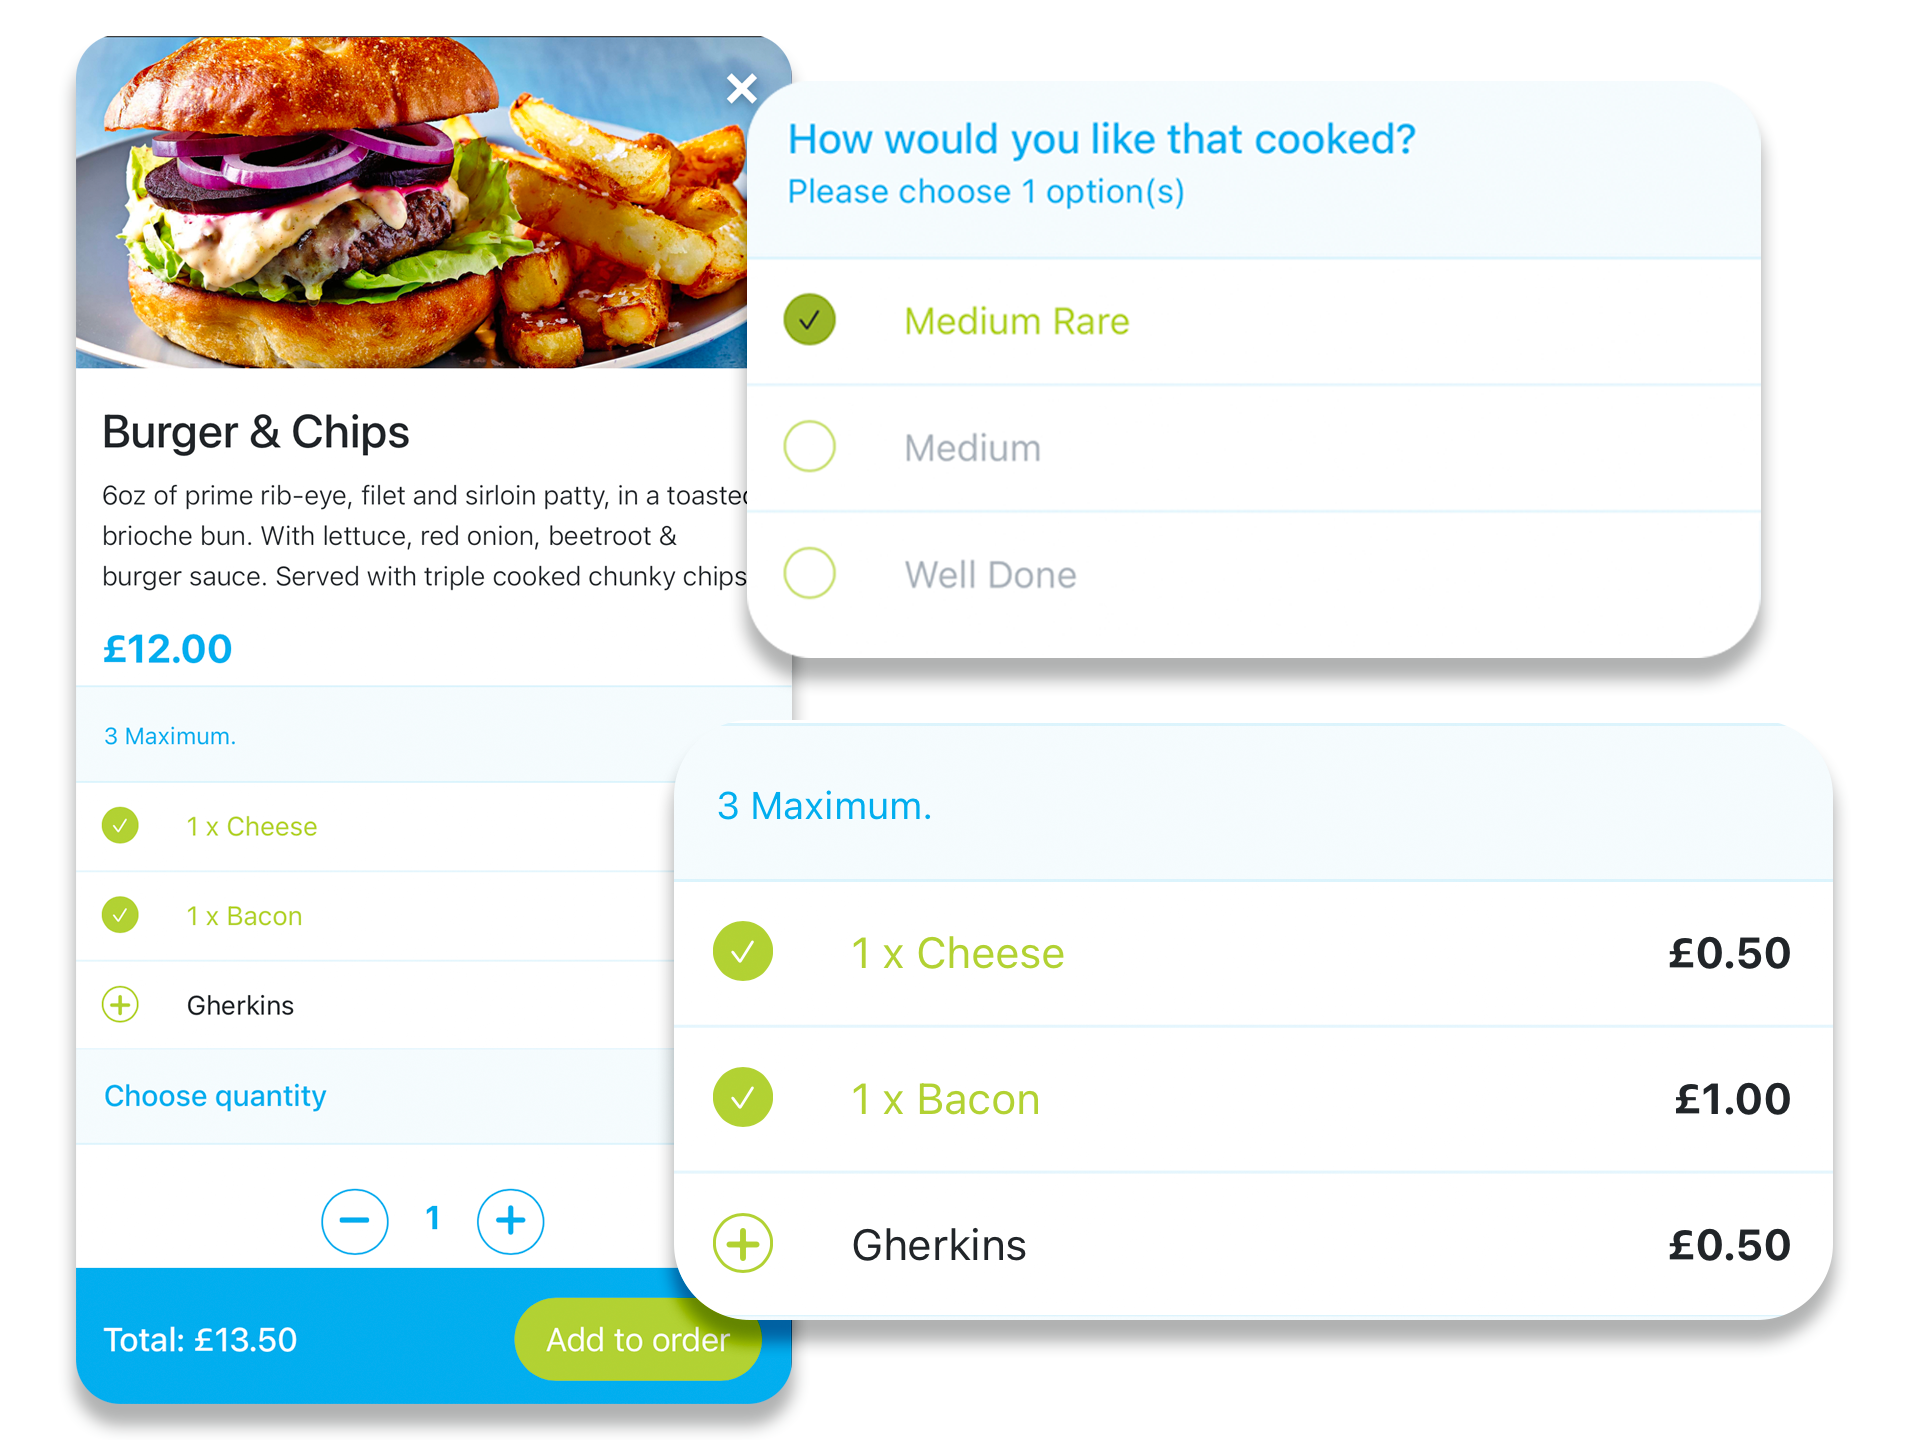 Mobile ordering app, burger & chips product & upsell options